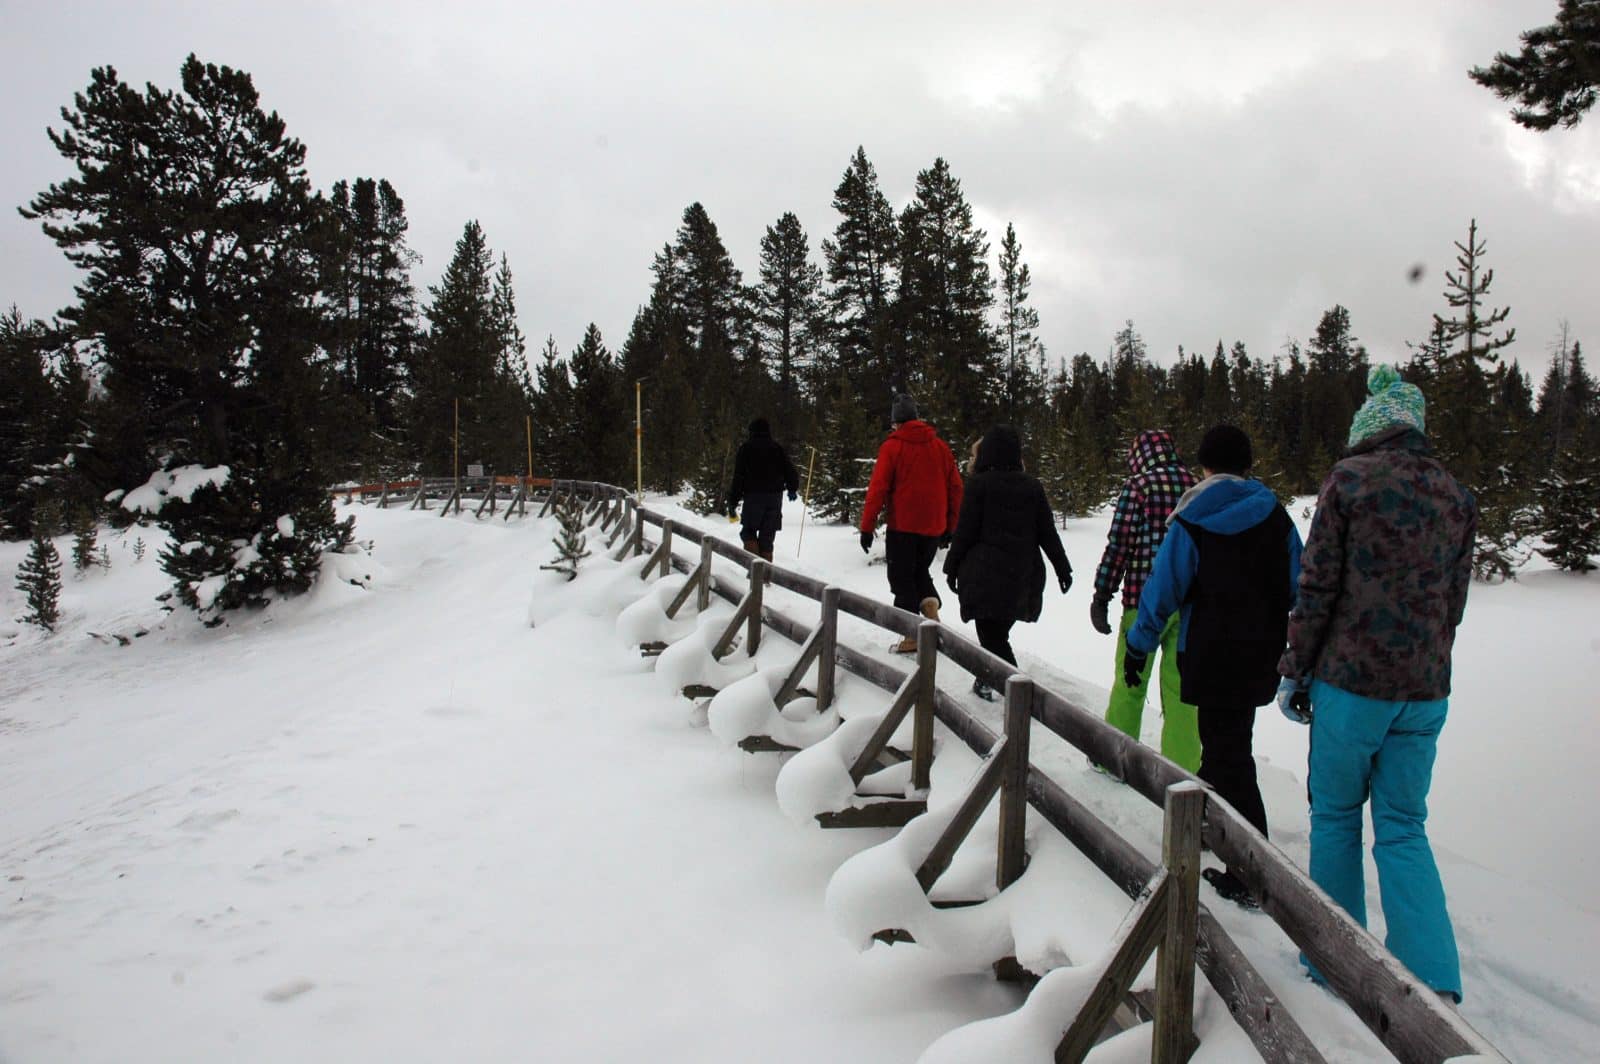 Walking the boardwalk in the snow in Yellowstone National Park